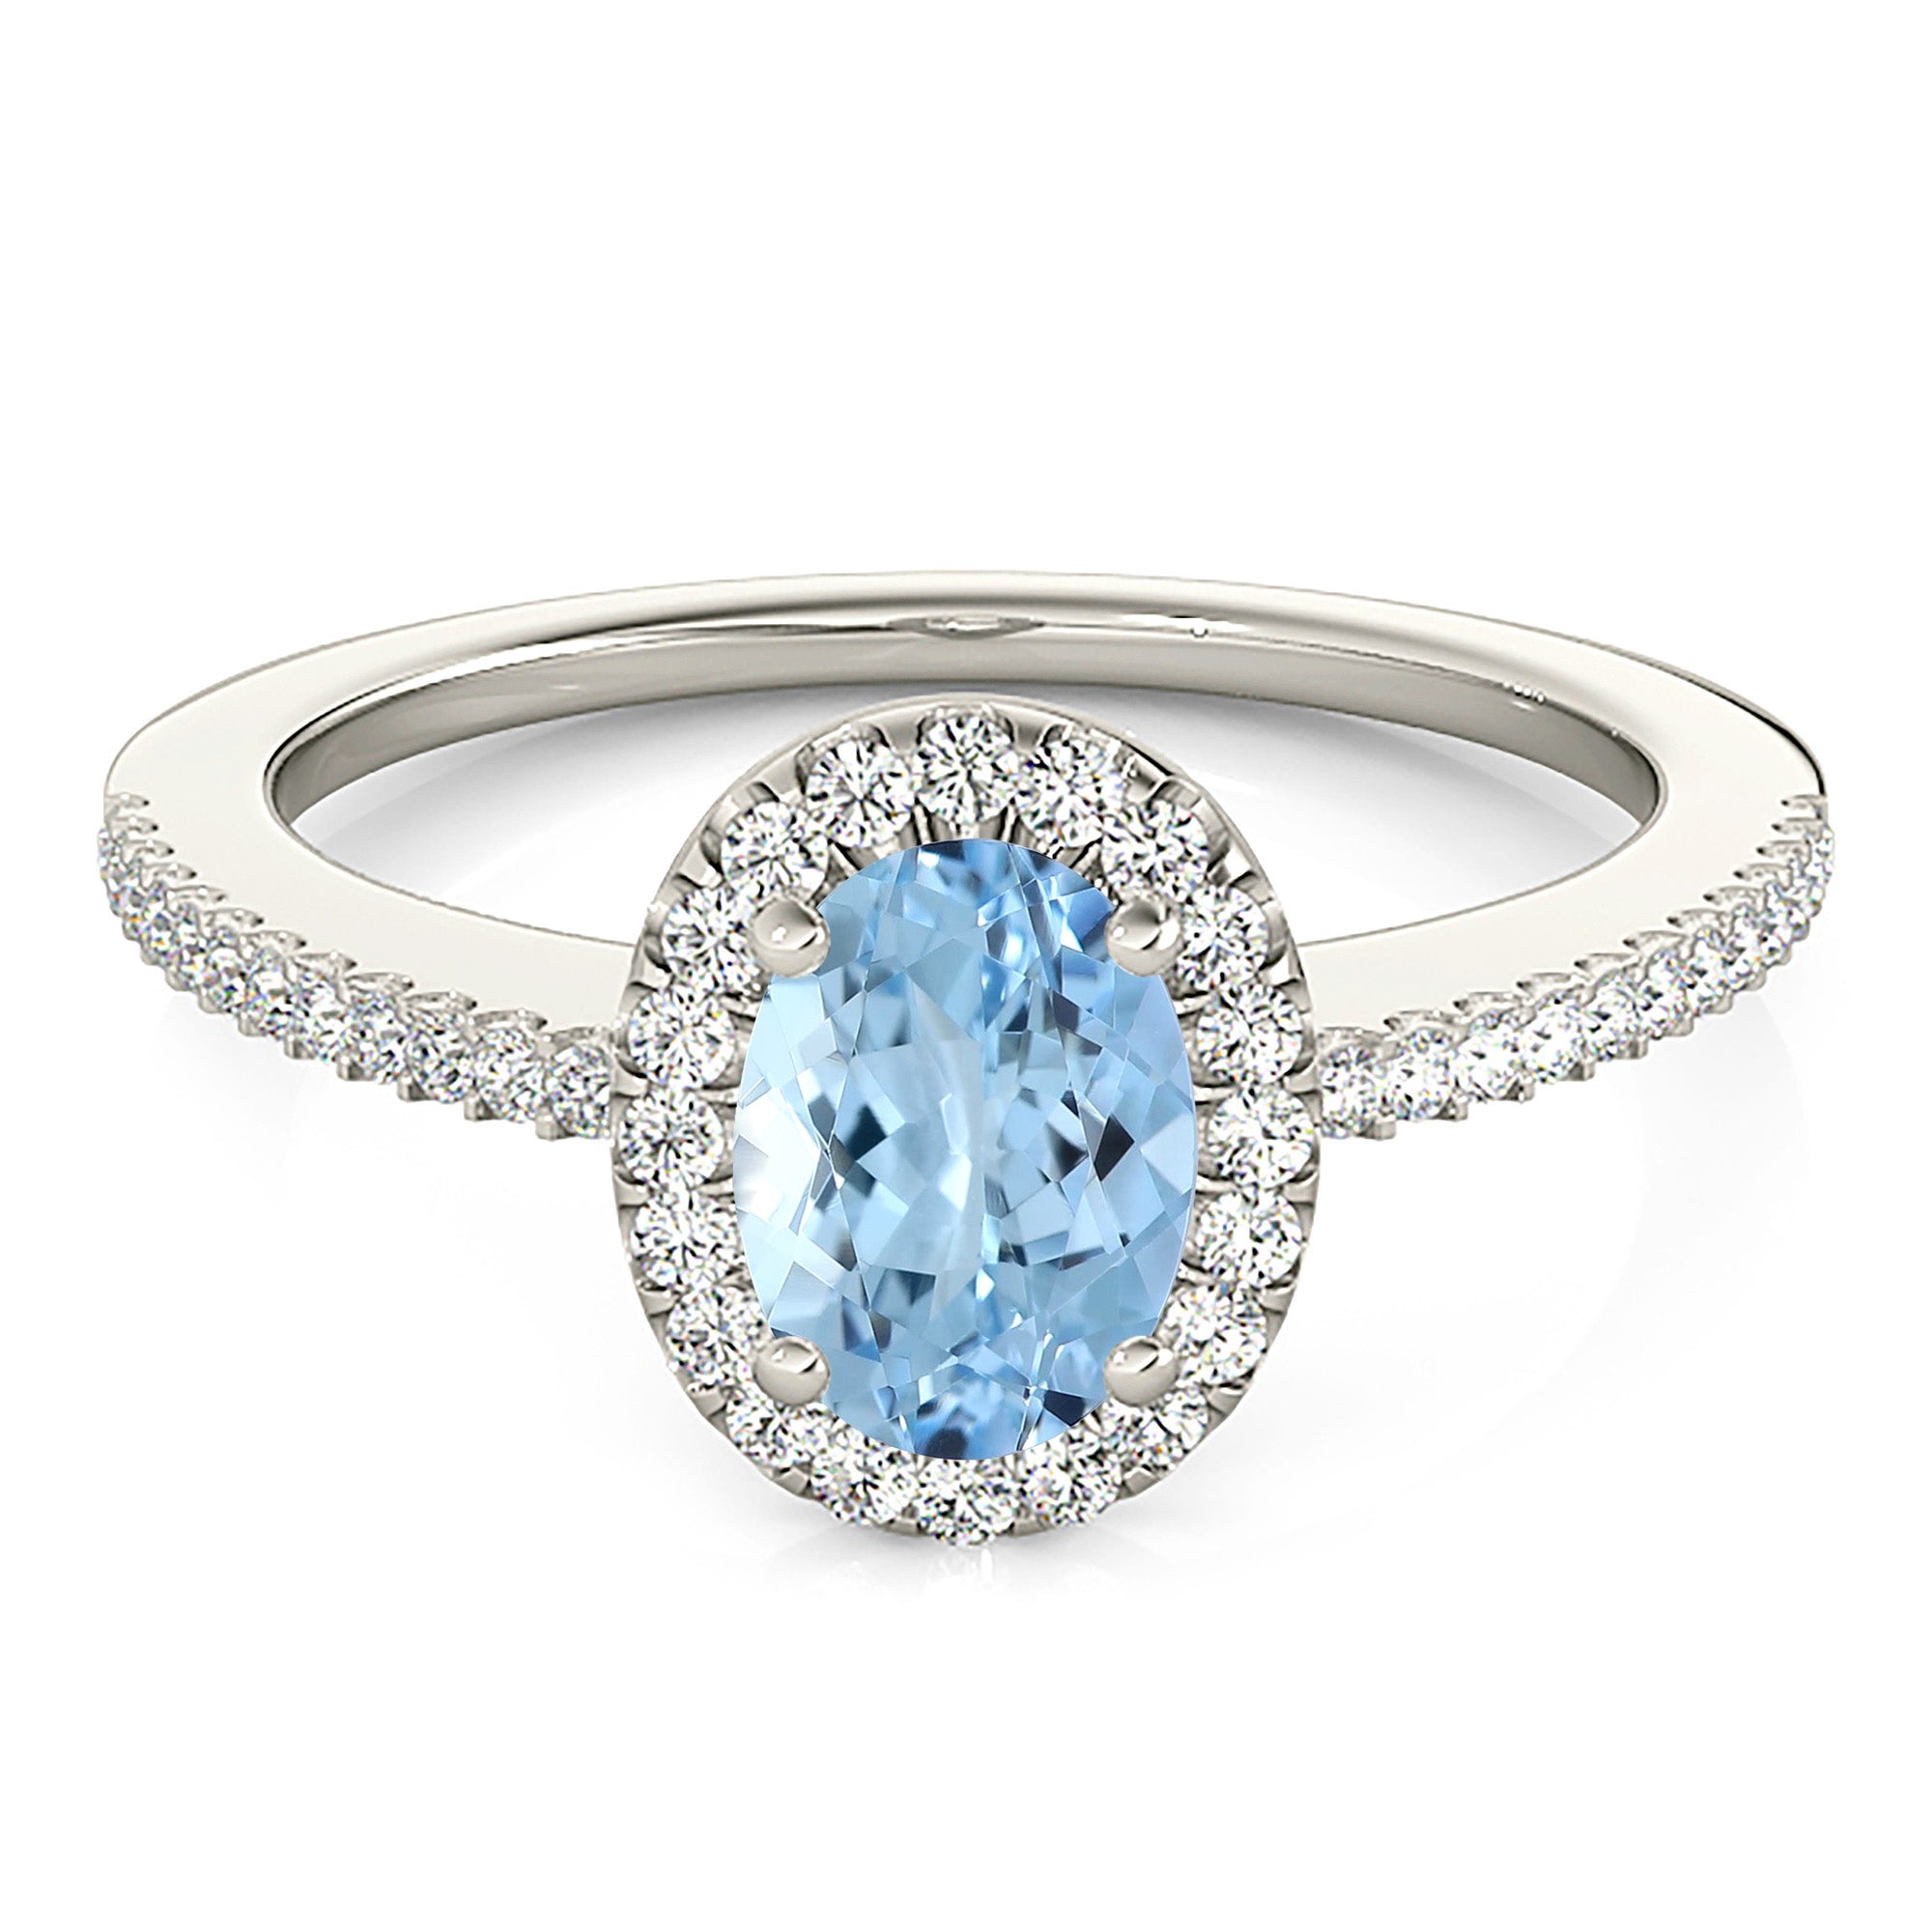 0.97 ct. Genuine Oval Aquamarine Ring With 0.20 ctw. Diamond Halo and Delicate Diamond Band | Oval Blue Aquamarine Halo Ring-in 14K/18K White, Yellow, Rose Gold and Platinum - Christmas Jewelry Gift -VIRABYANI